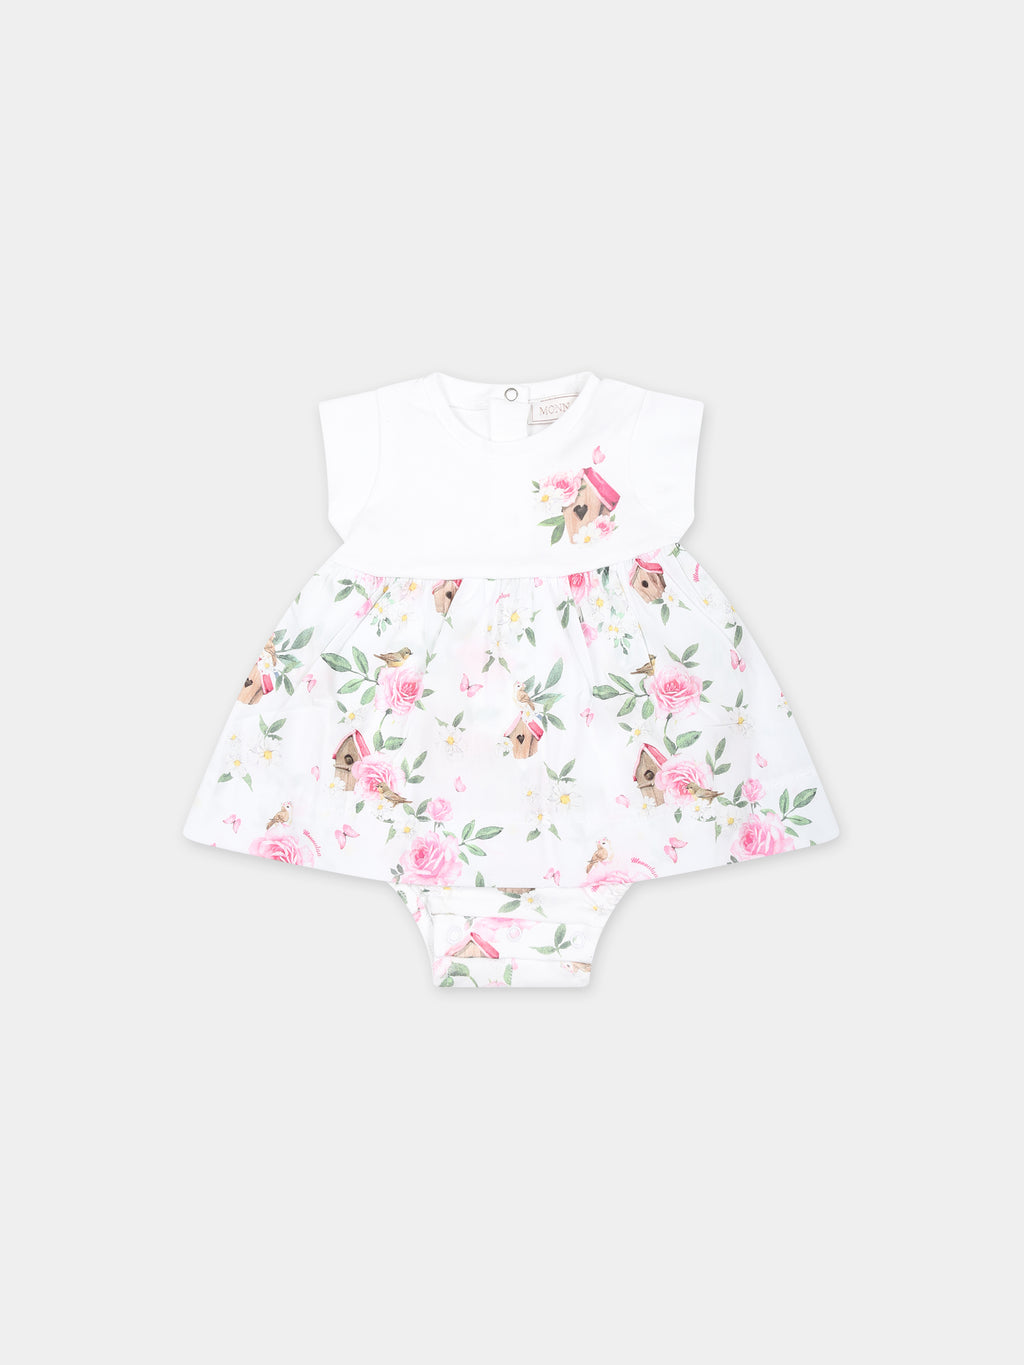 White romper for baby girl with flowers print